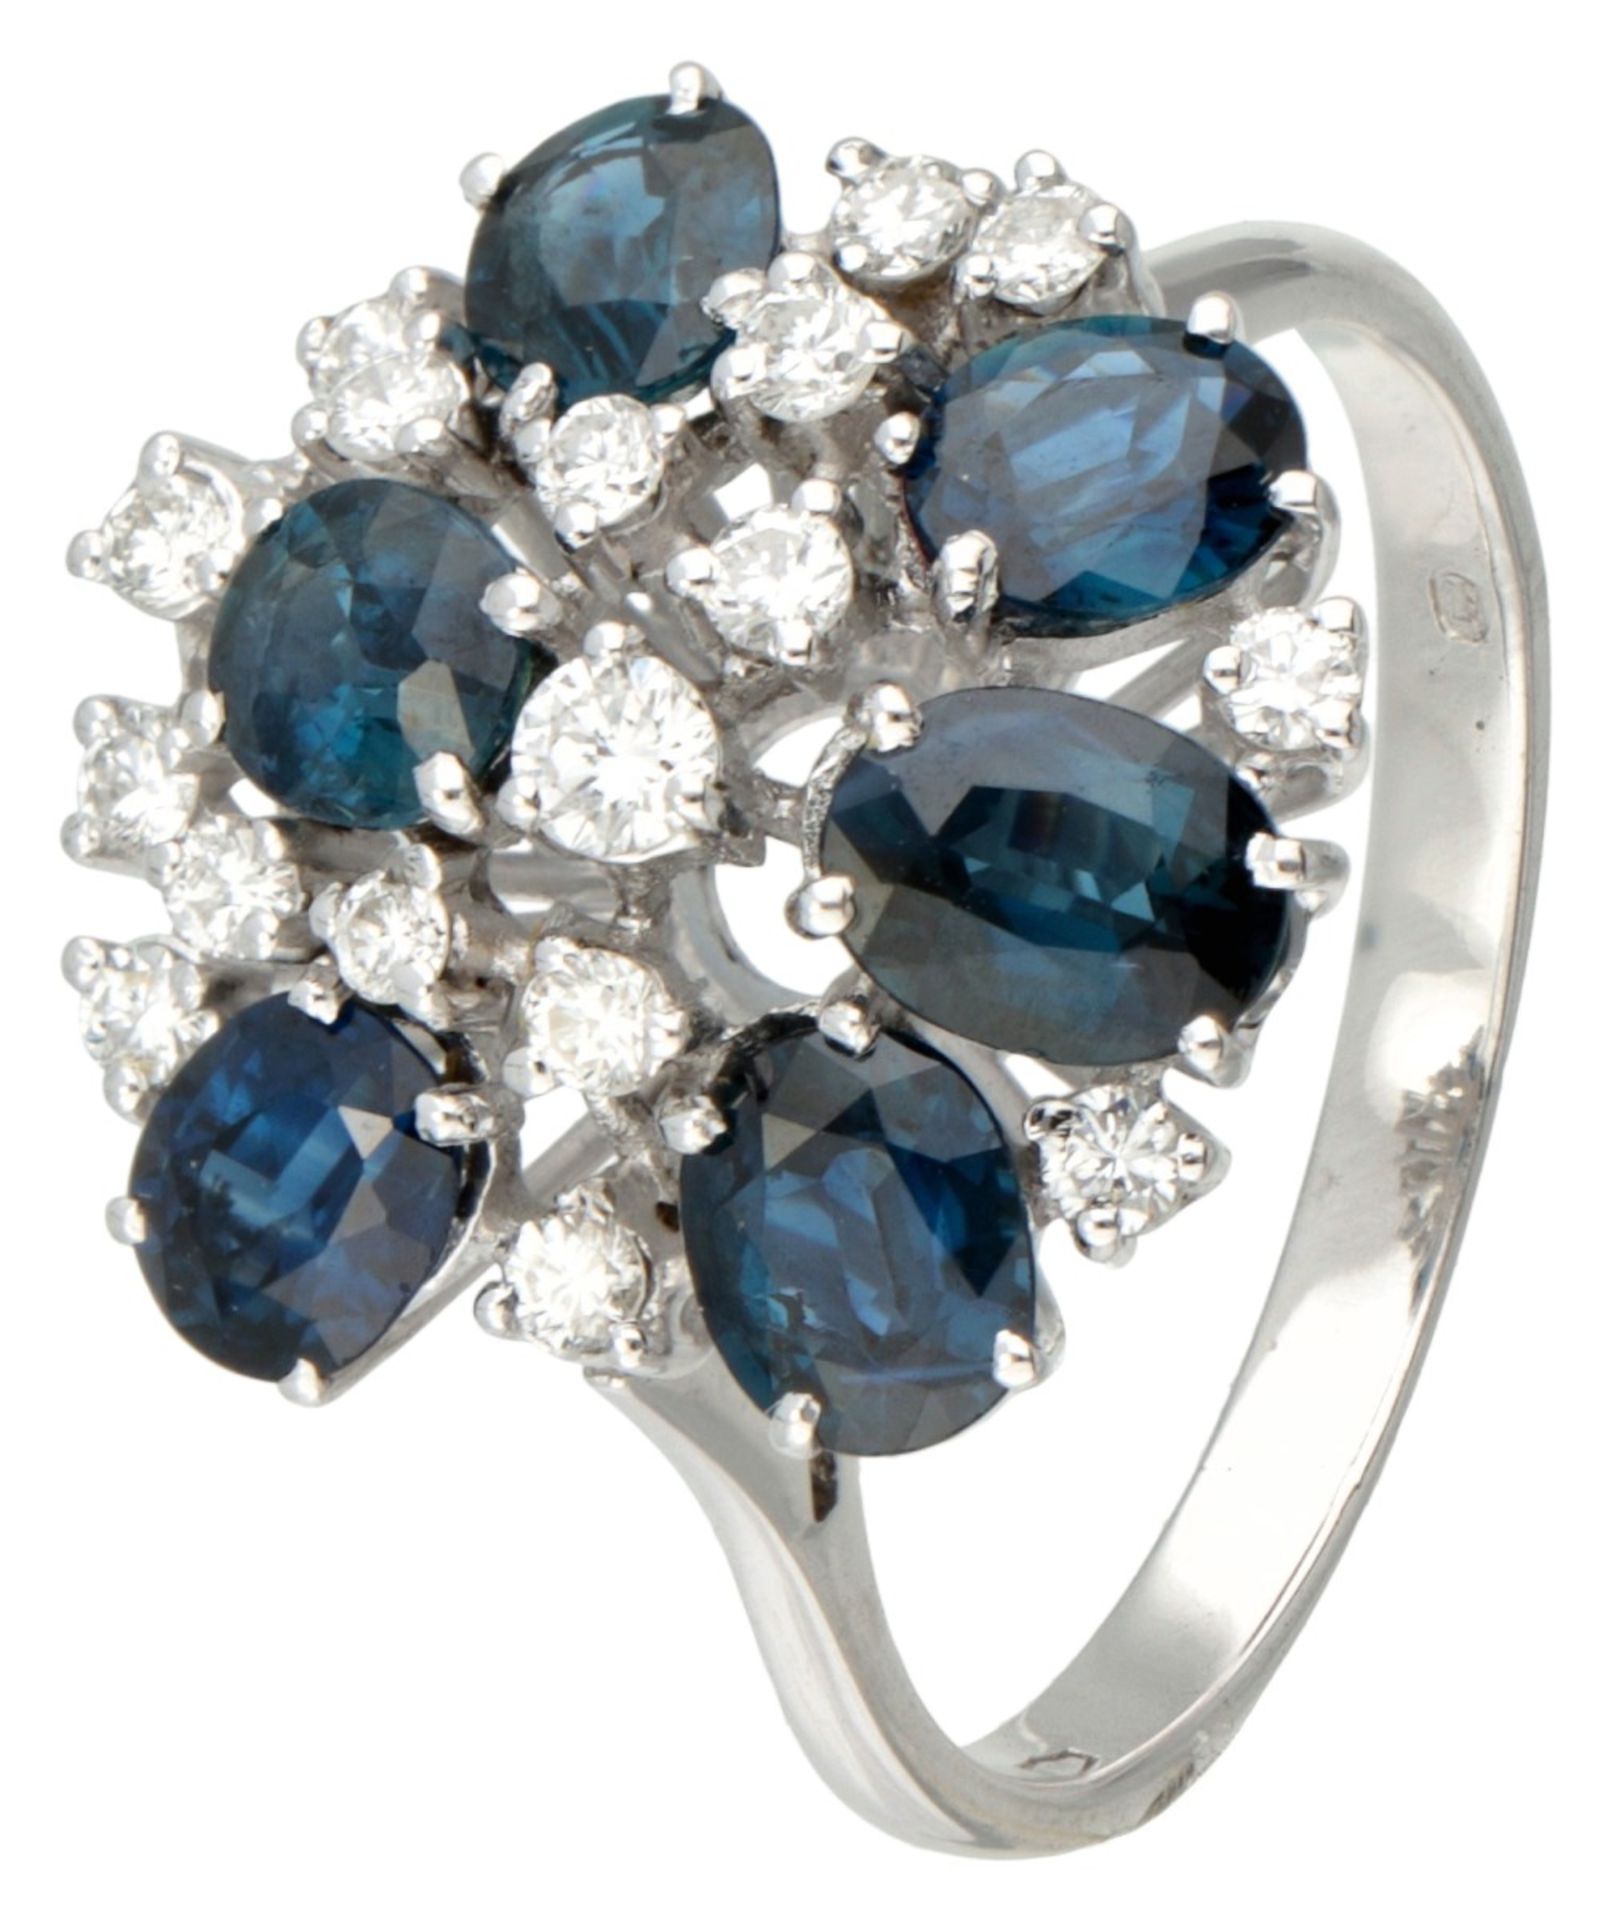 18K. White gold ring set with approx. 2.70 ct. natural sapphire and approx. 0.33 ct. diamond.